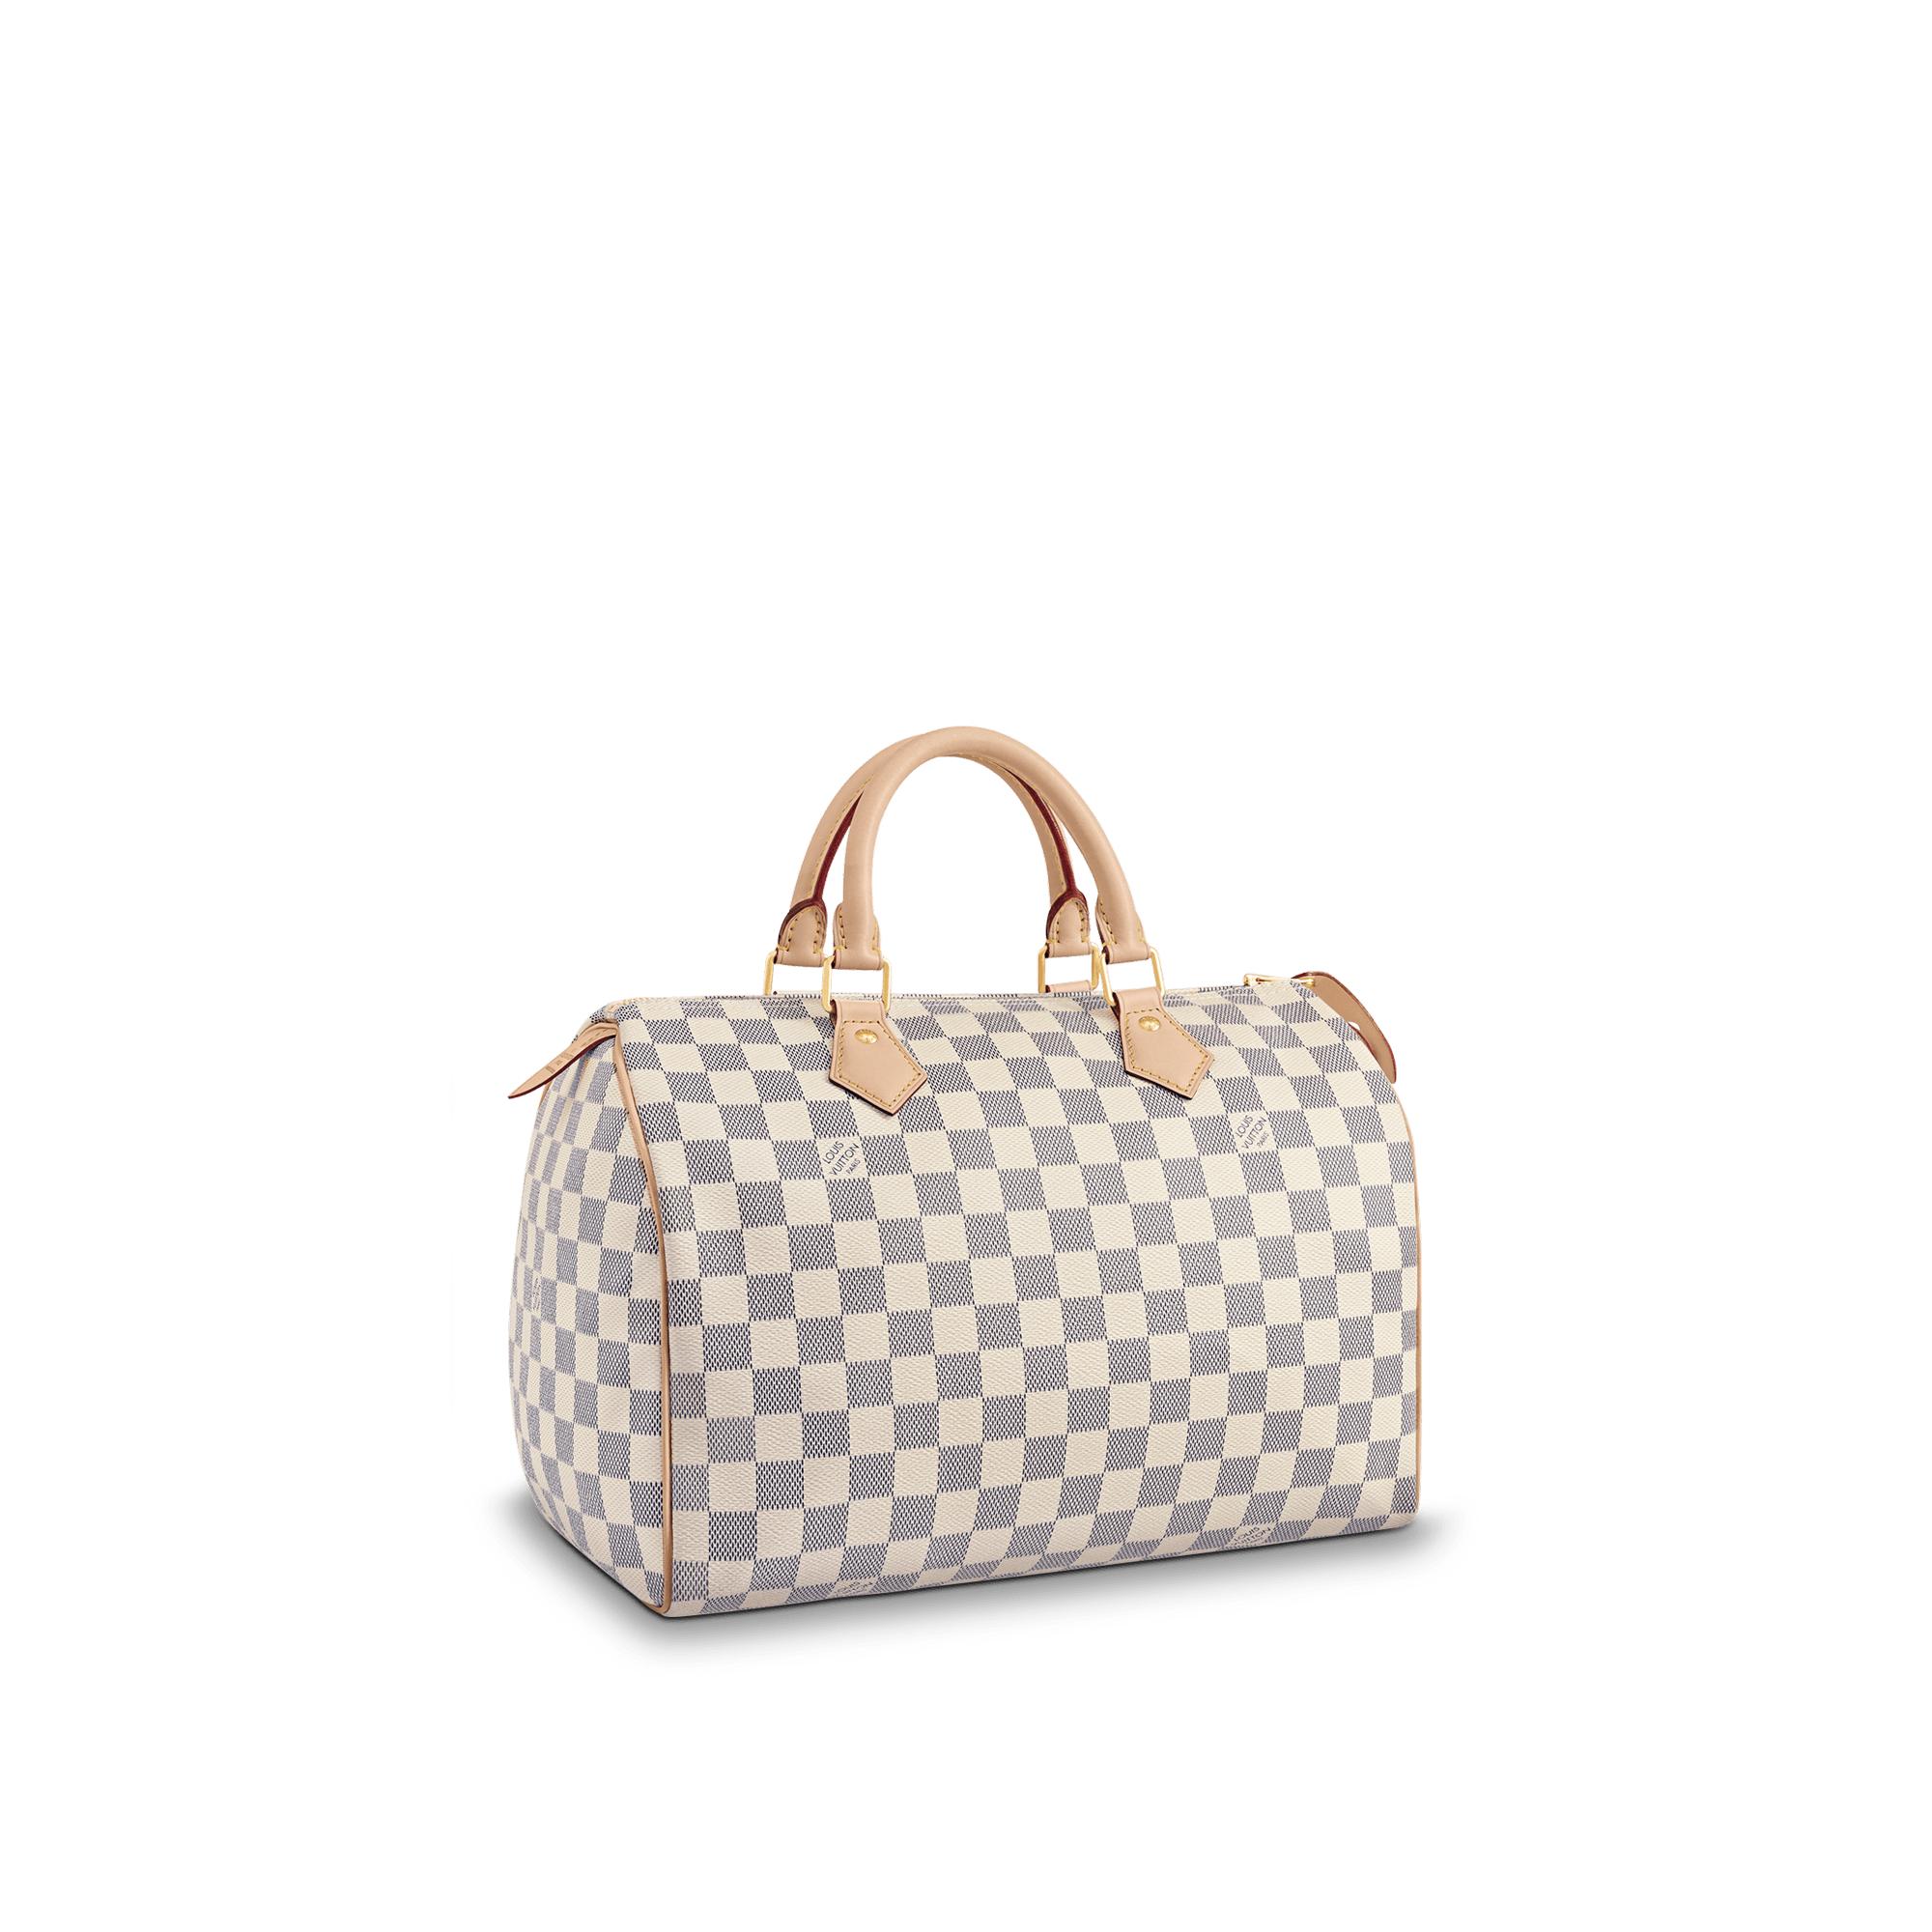 Same, same but different - Alternatives to the Louis Vuitton